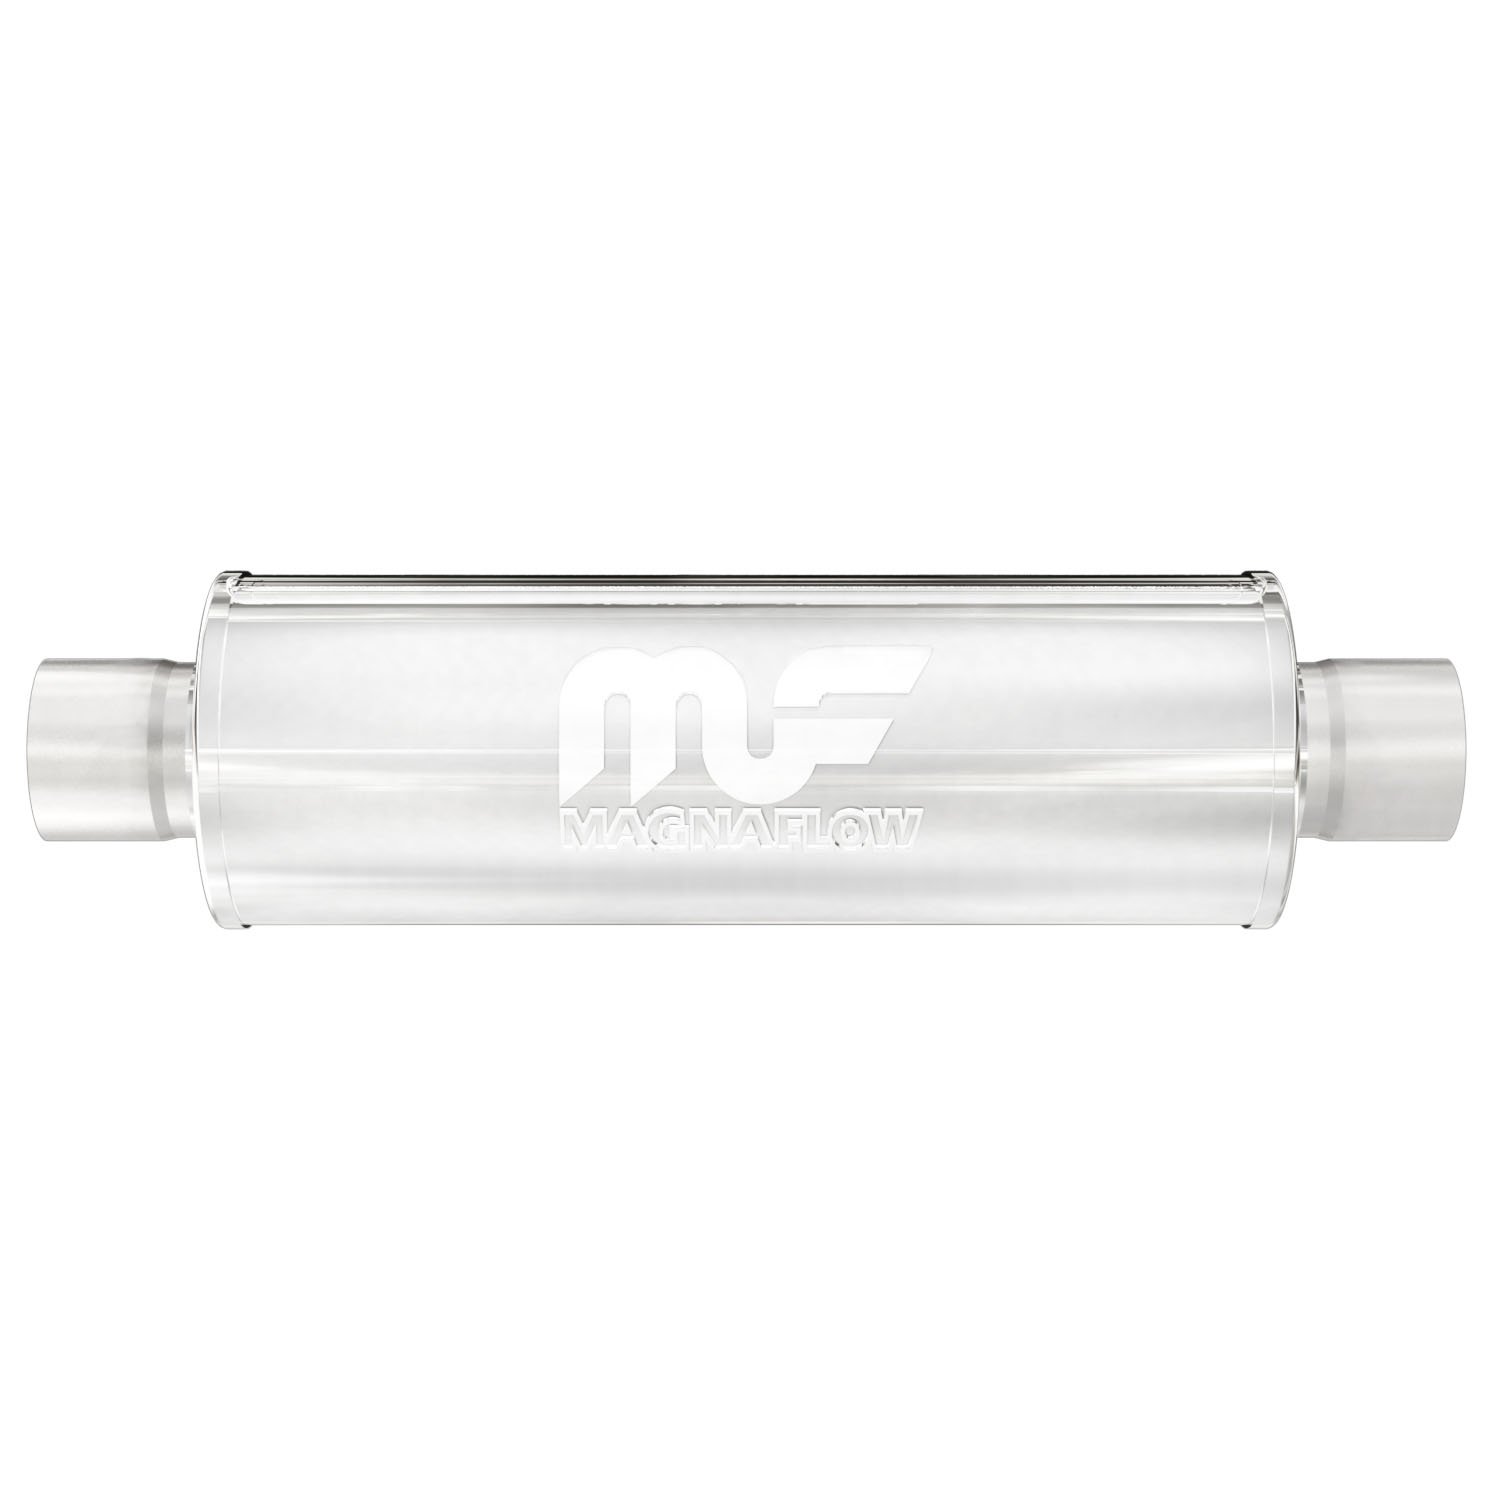 5" Round Muffler, Center In/Center Out: 3", Body Length: 14", Overall Length: 20", Core Size: 3" [Brushed Finish]